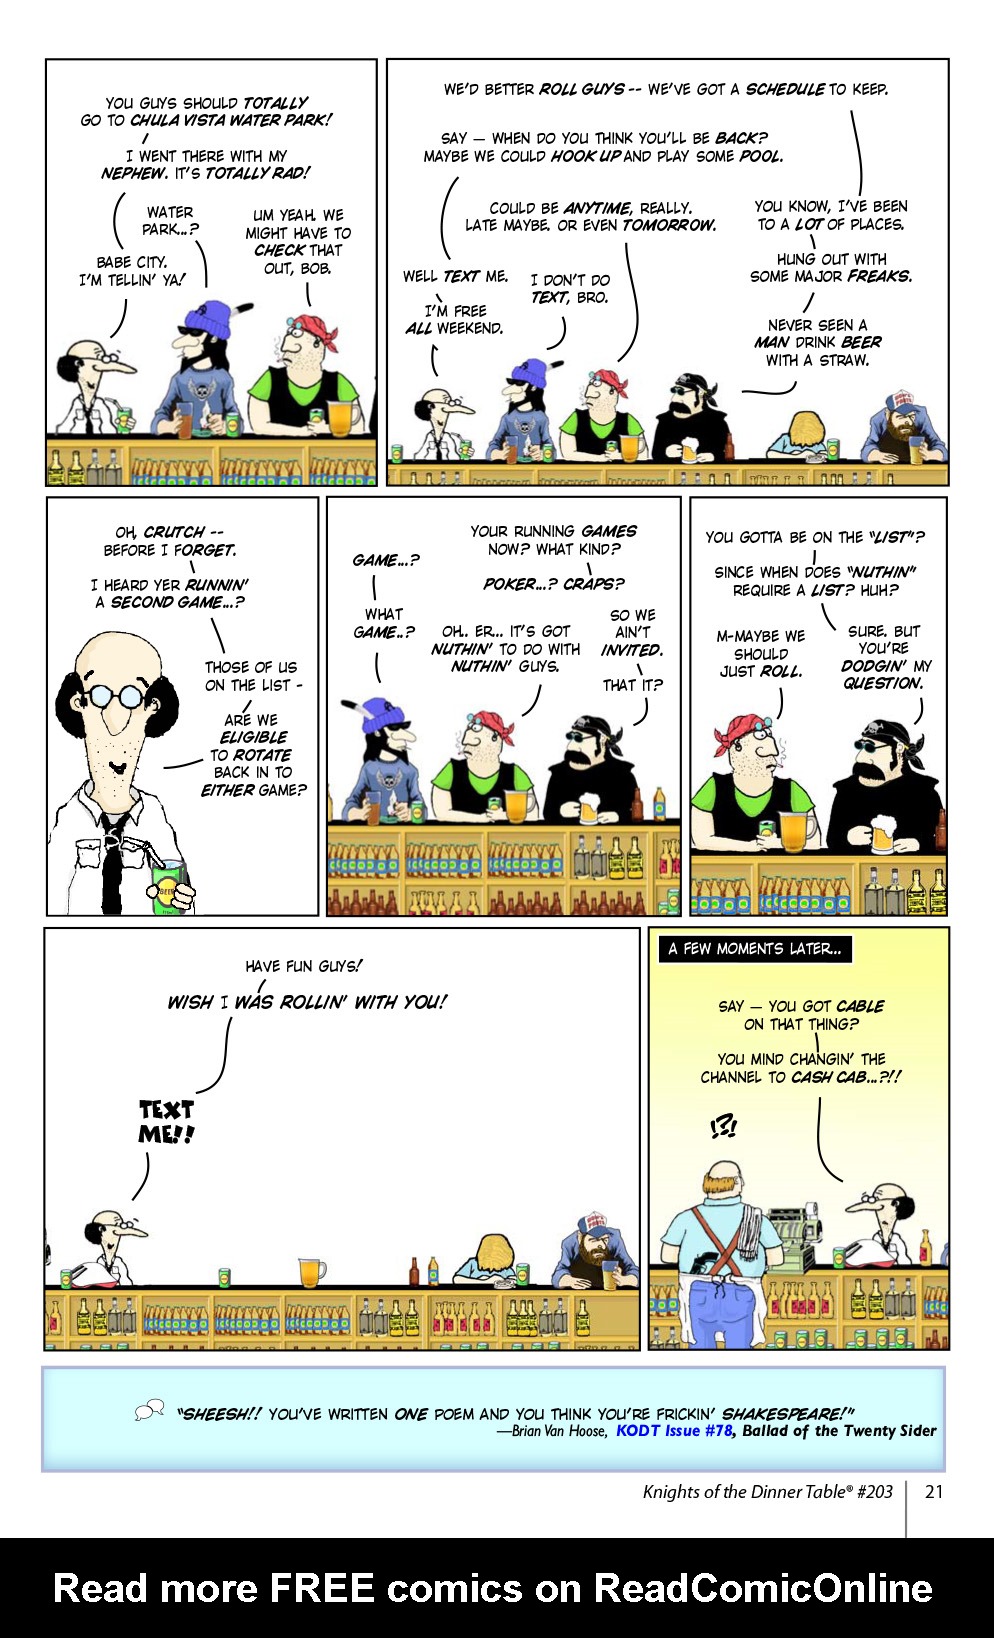 Read online Knights of the Dinner Table comic -  Issue #203 - 23